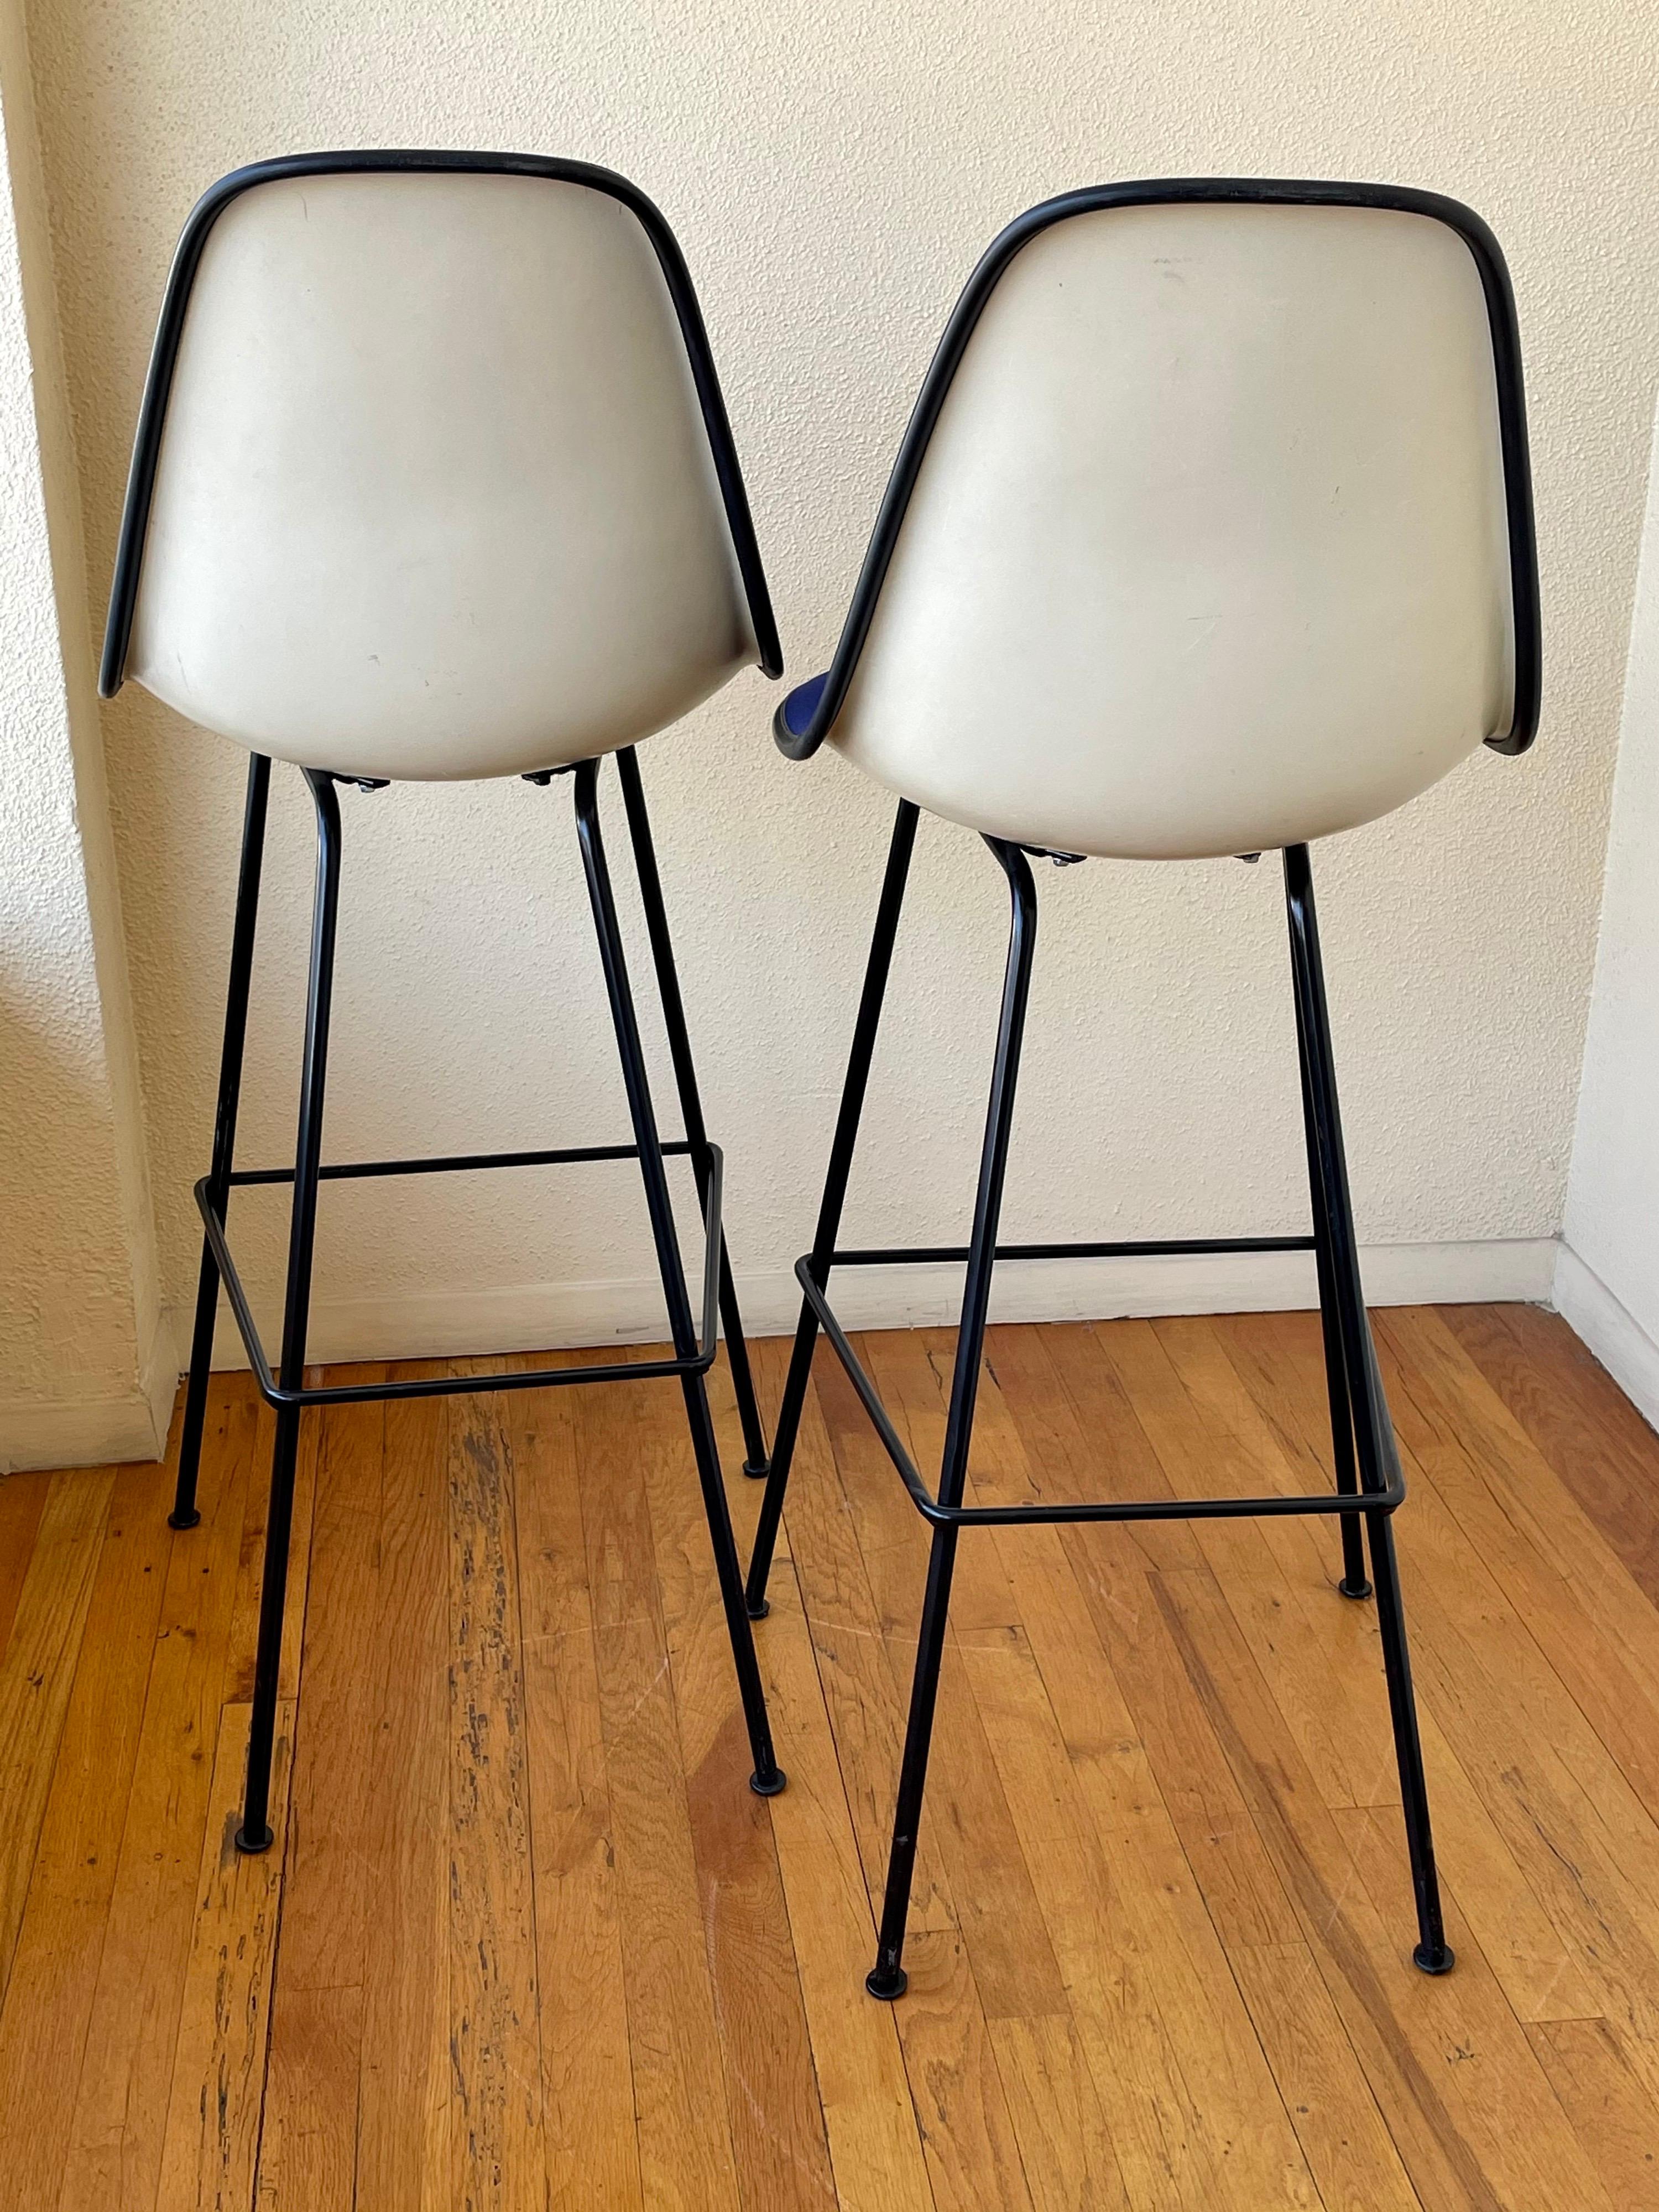 American Pair of Barstools Designed by Eames for Herman Miller with Blue Velvet Covers For Sale